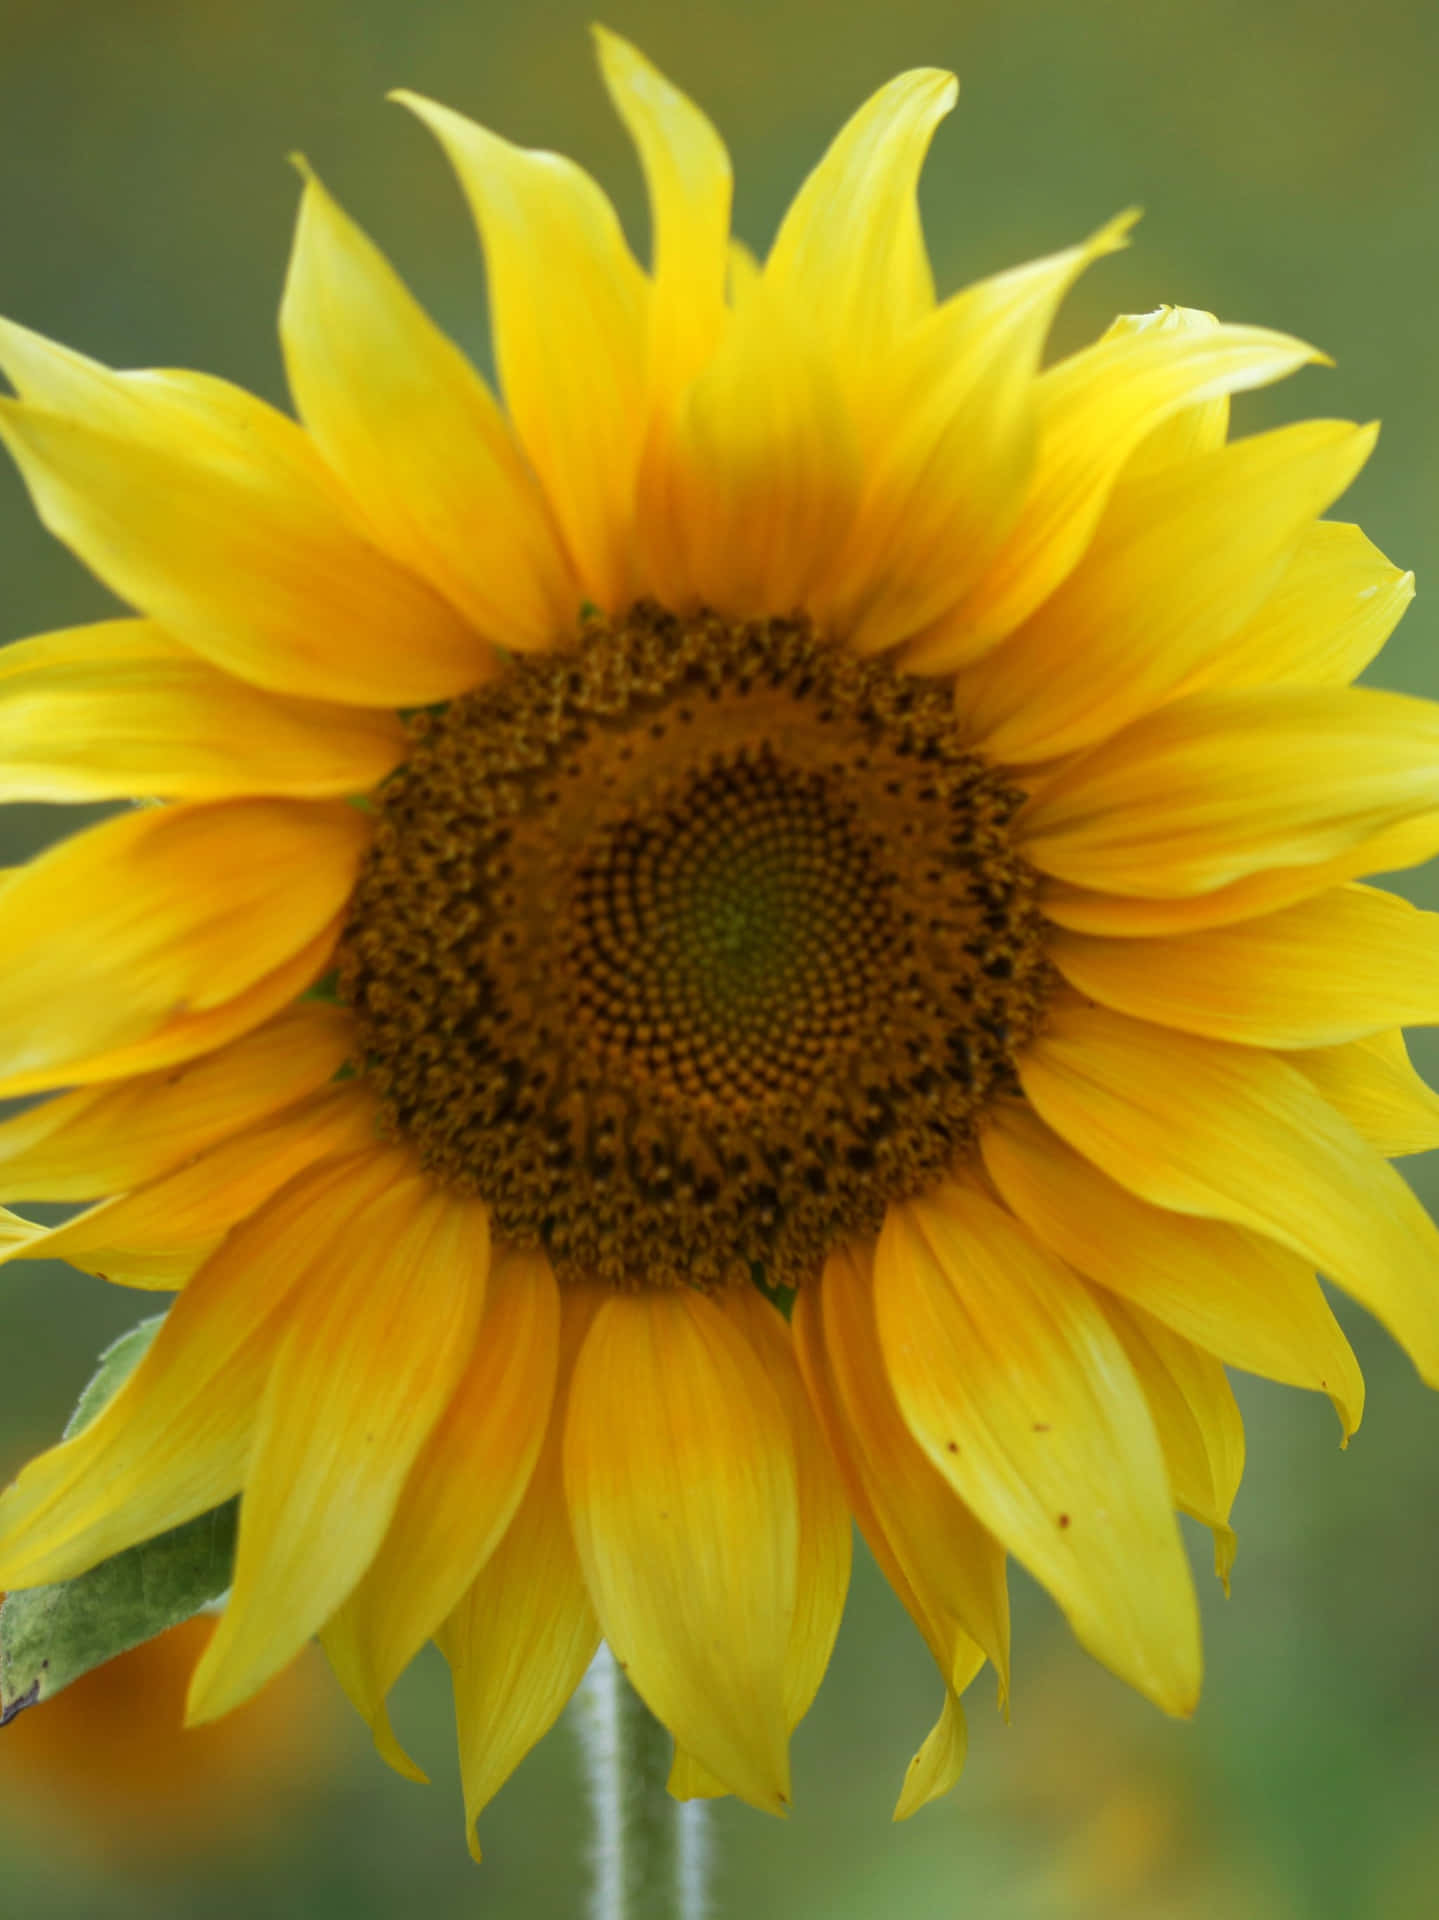 "Brighten up your call with Sunflower Phone!" Wallpaper